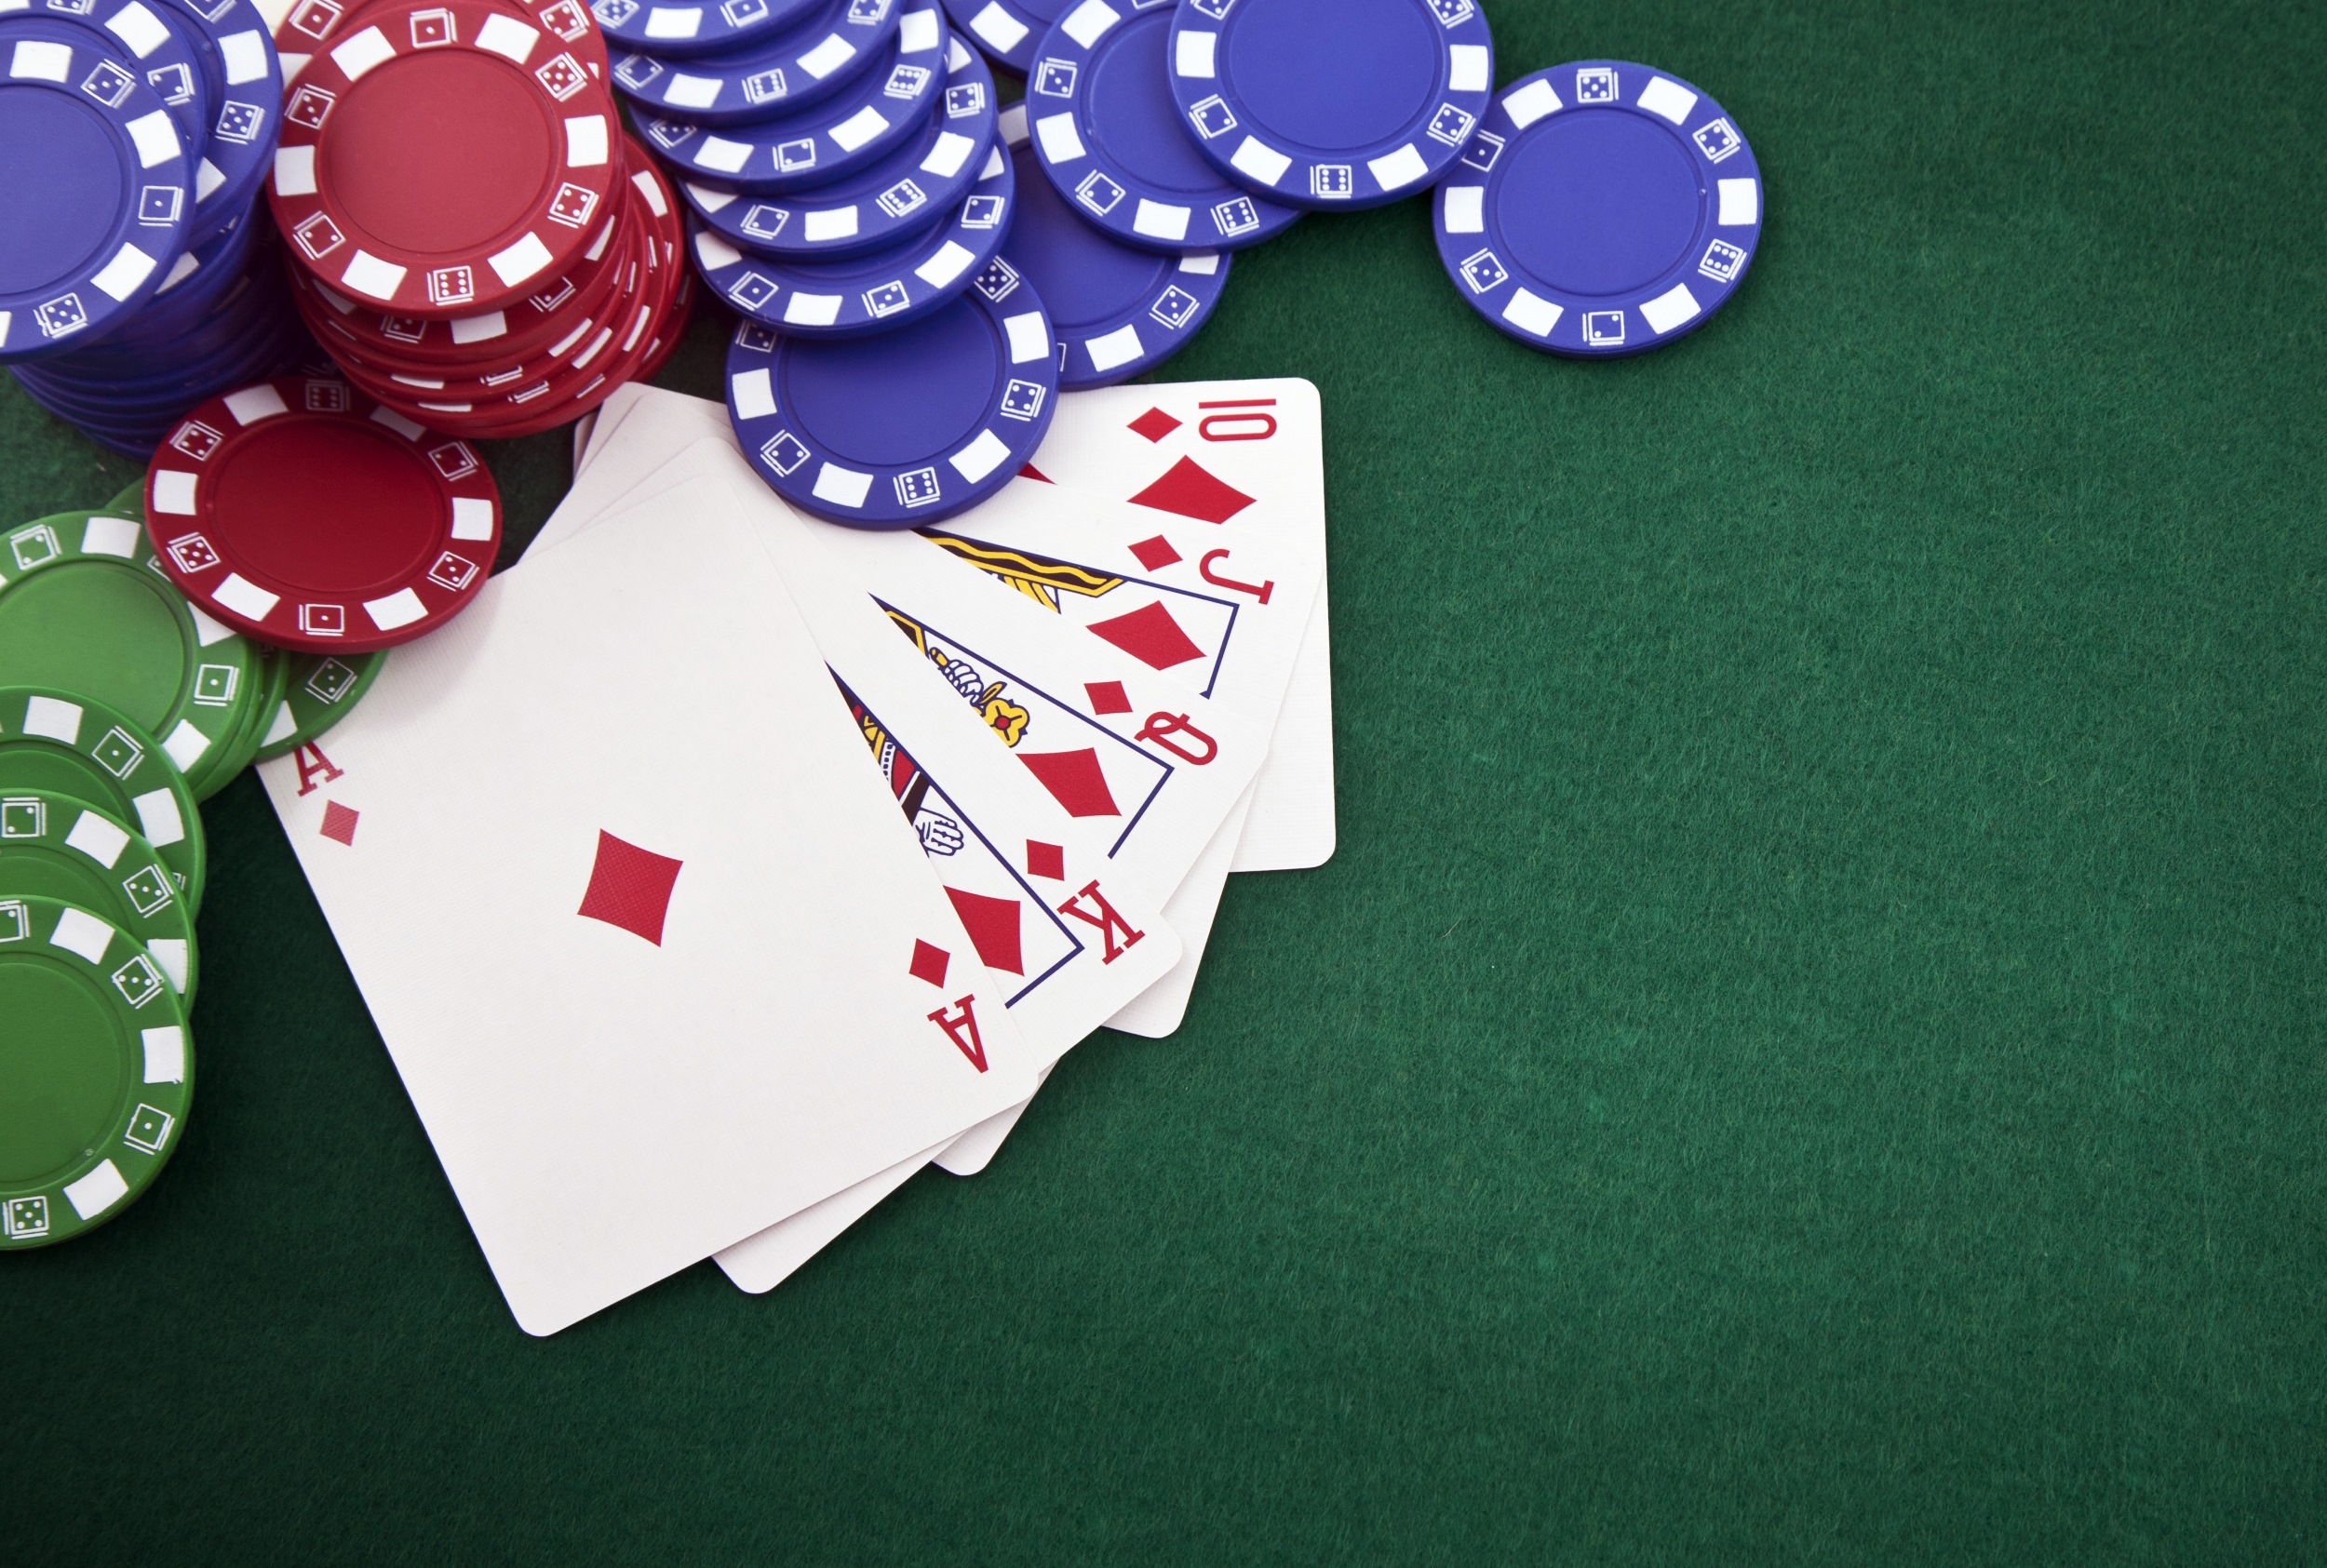 An important guide about online gambling sites